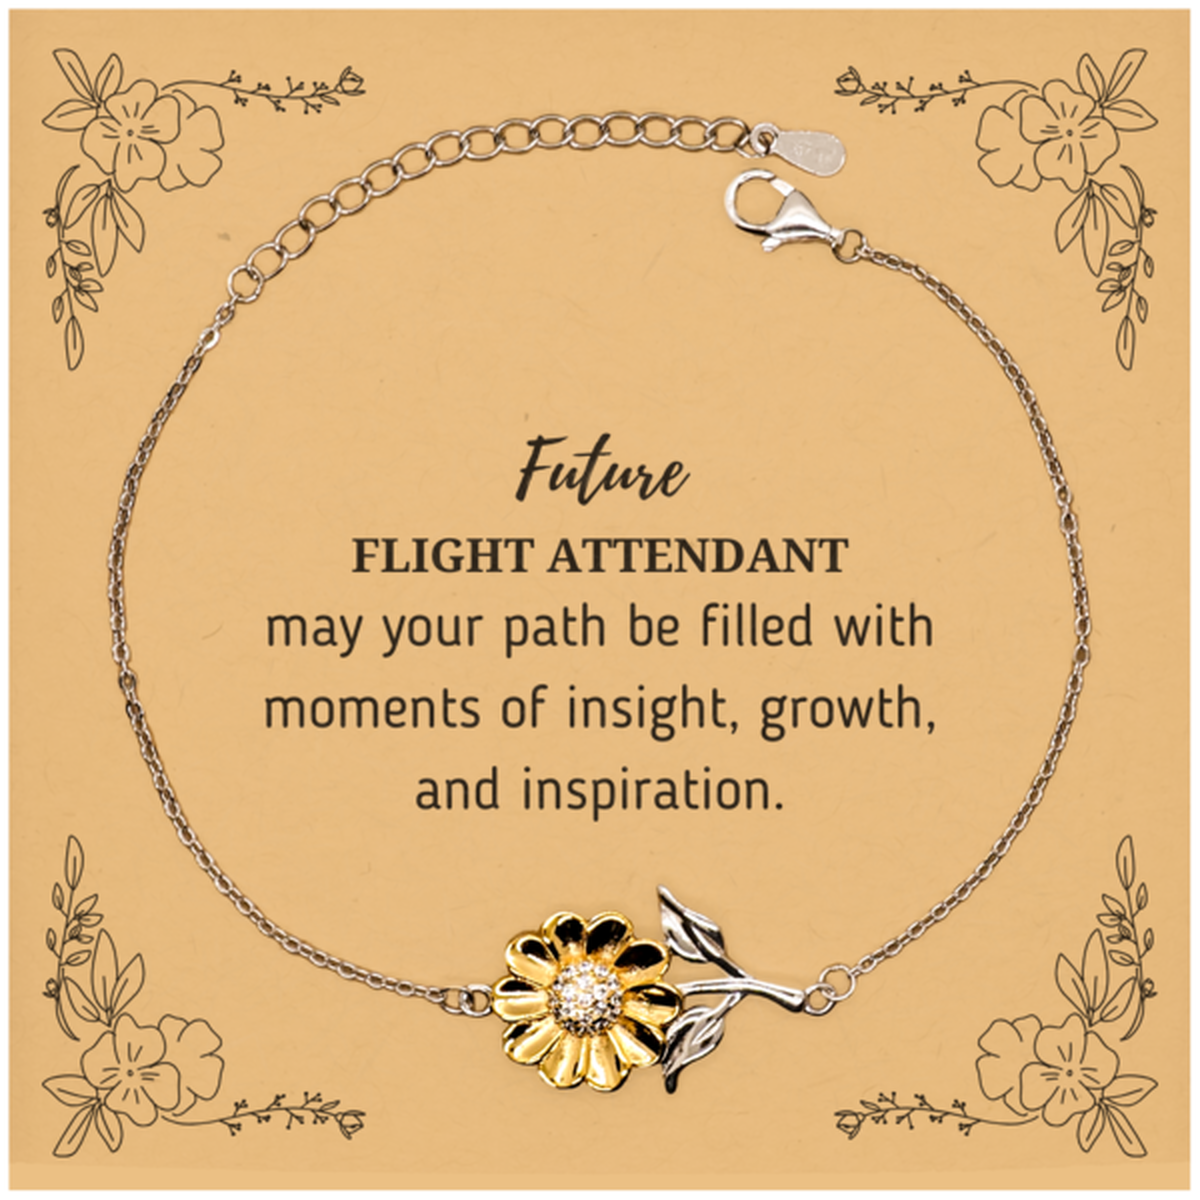 Future Flight Attendant Gifts, May your path be filled with moments of insight, Graduation Gifts for New Flight Attendant, Christmas Unique Sunflower Bracelet For Men, Women, Friends